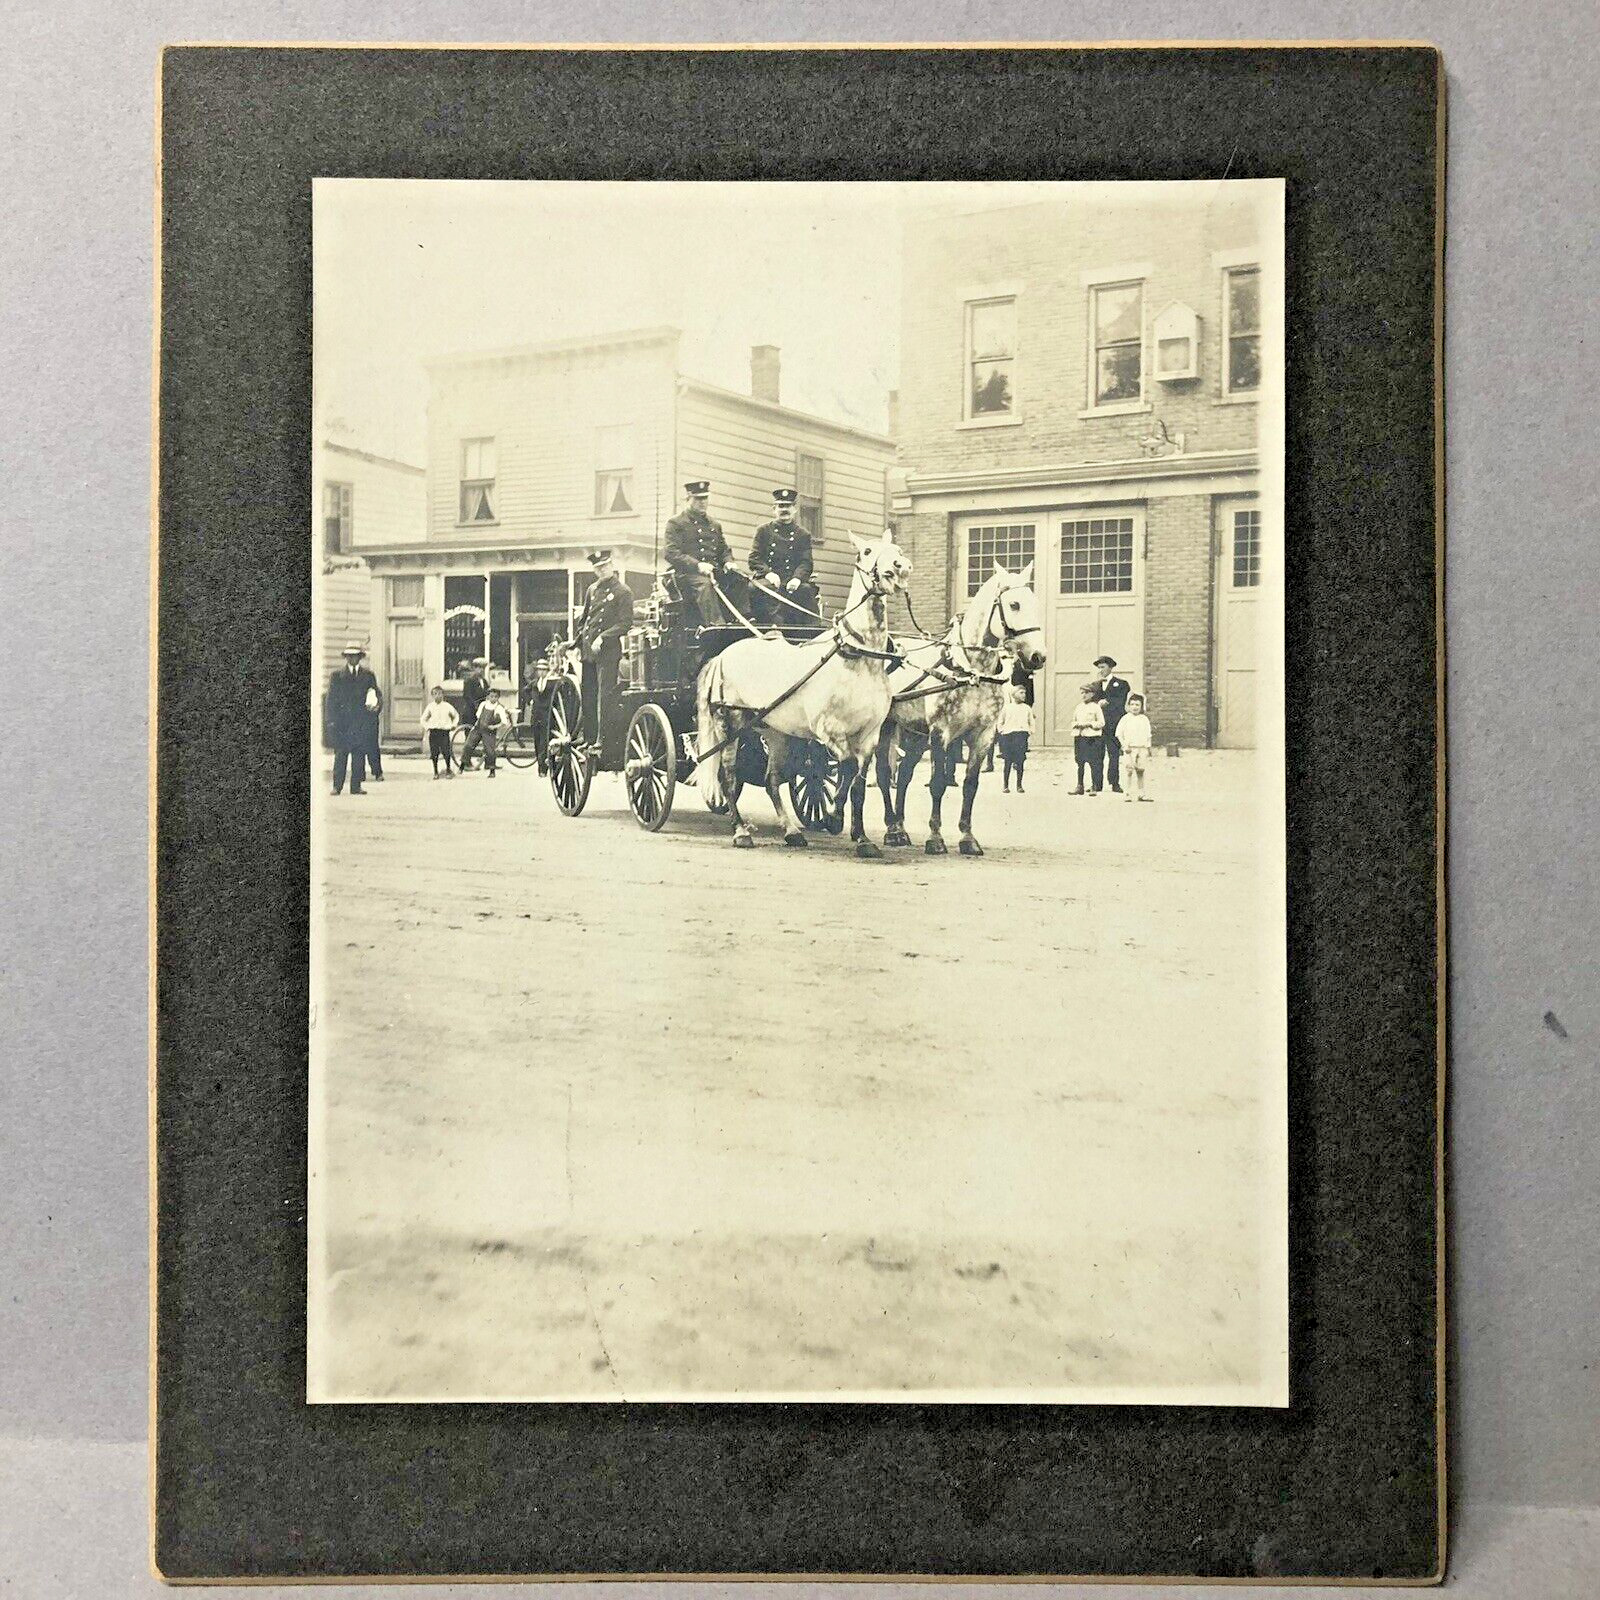 Vintage Cabinet Card Photo Firemen-Horse Drawn Fire Wagon Firehouse Building